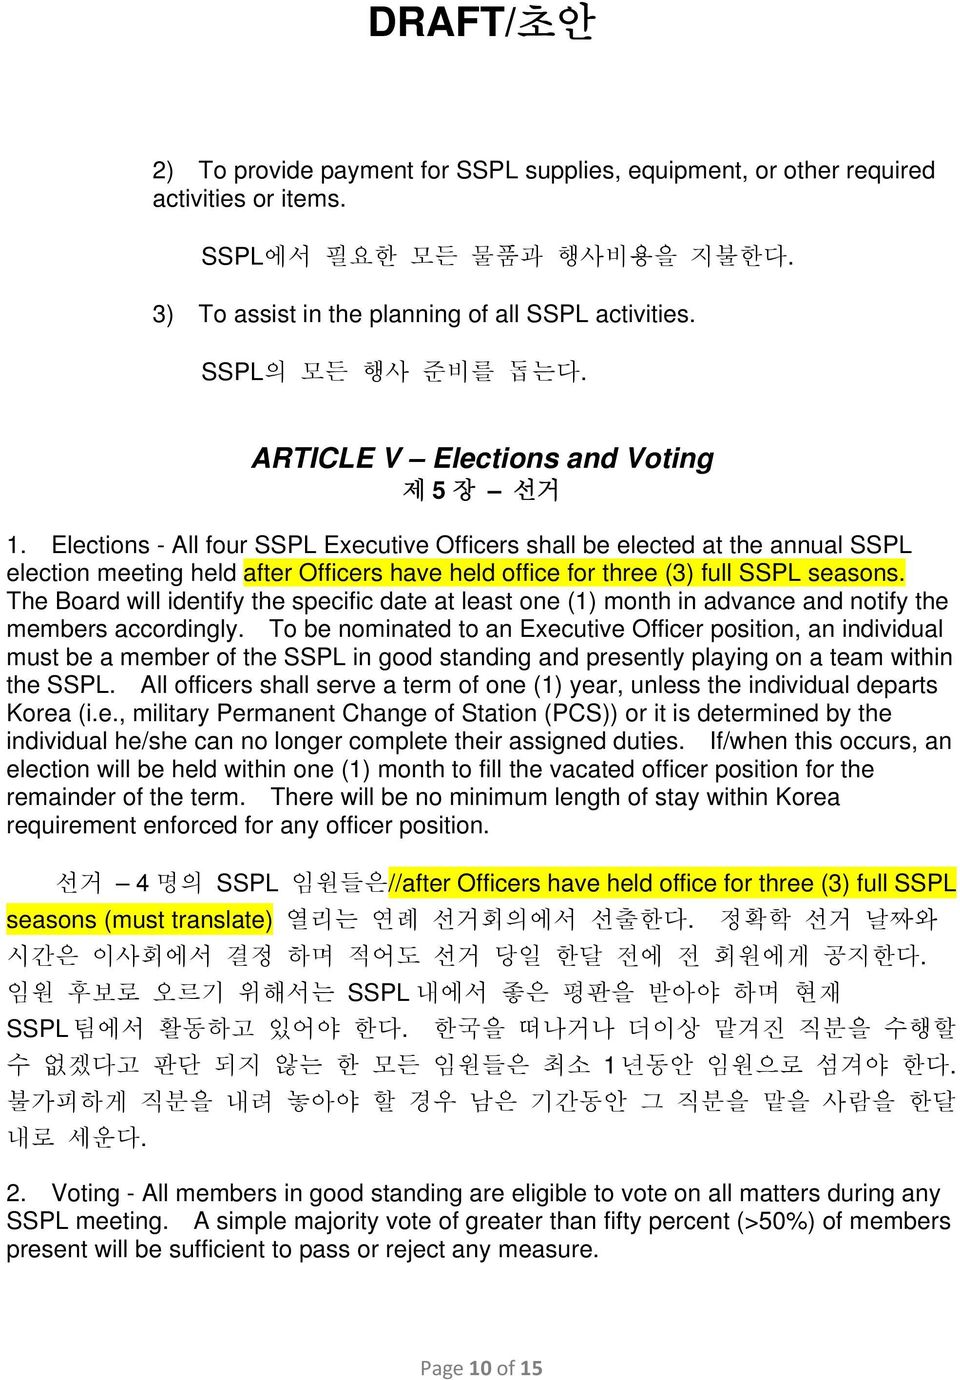 Elections - All four SSPL Executive Officers shall be elected at the annual SSPL election meeting held after Officers have held office for three (3) full SSPL seasons.